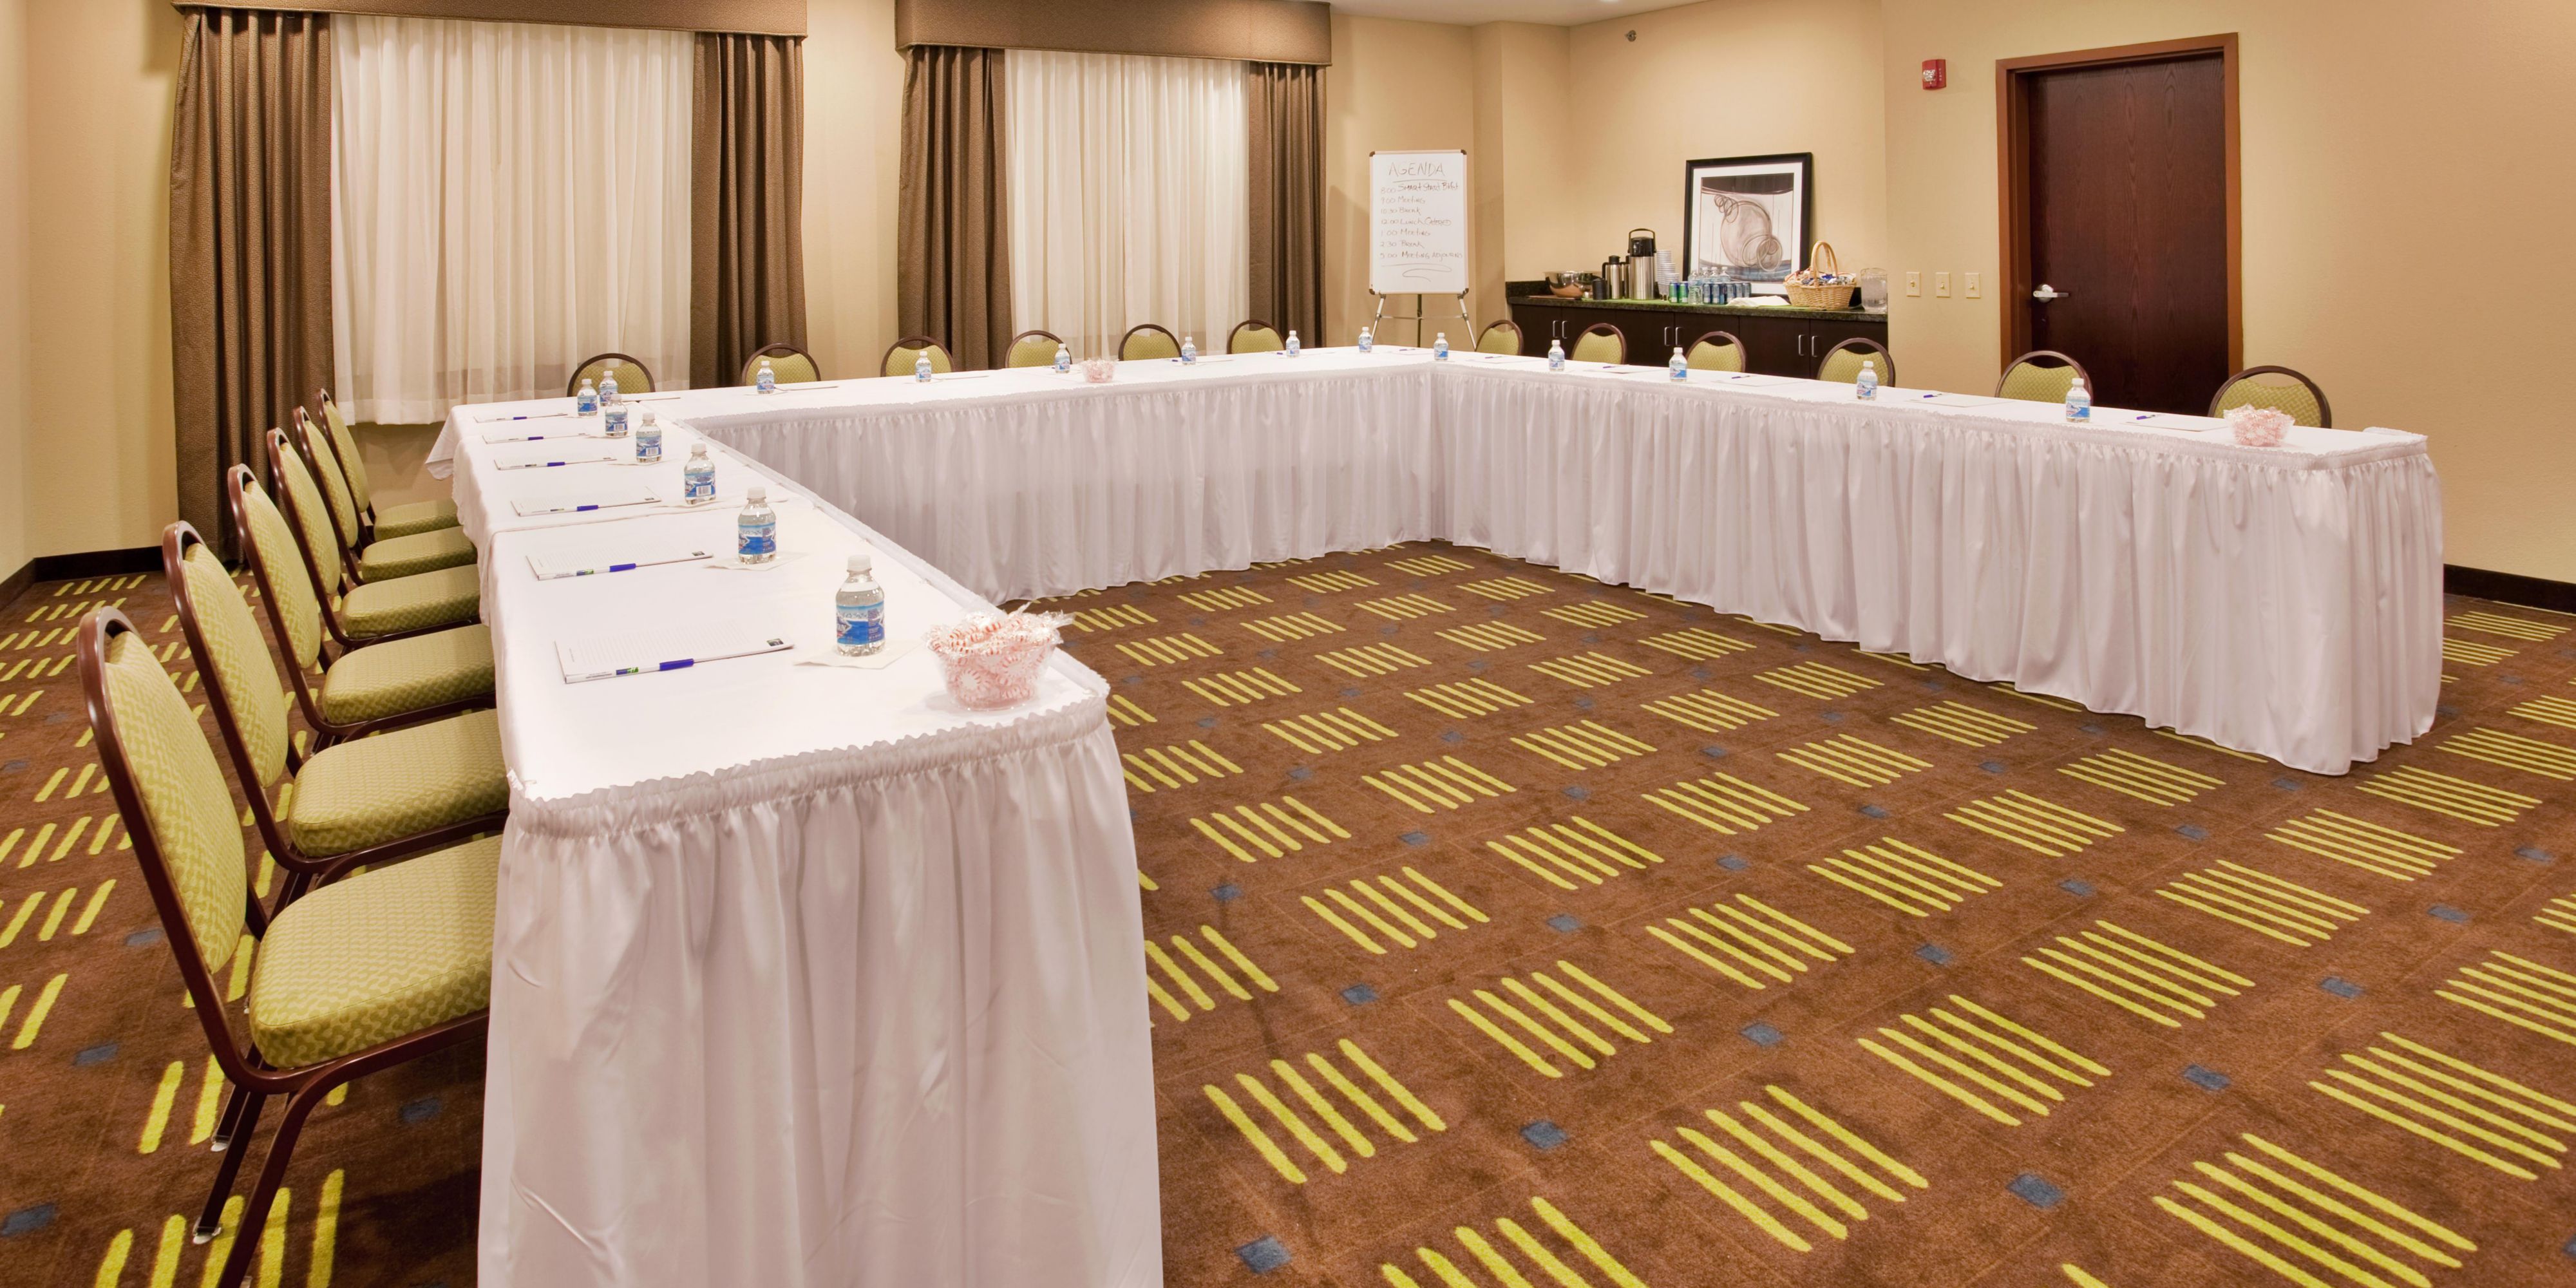 Let us help you plan your next meeting, whether it be for a business meeting or family reunion,  we have got you covered!  Our newly renovated meeting room is perfect for up to 25 guests with flexible seating set up and natural lighting.   Meeting room includes a screen, projector, free WIFI and whiteboard.  Call us now to book your next meeting!